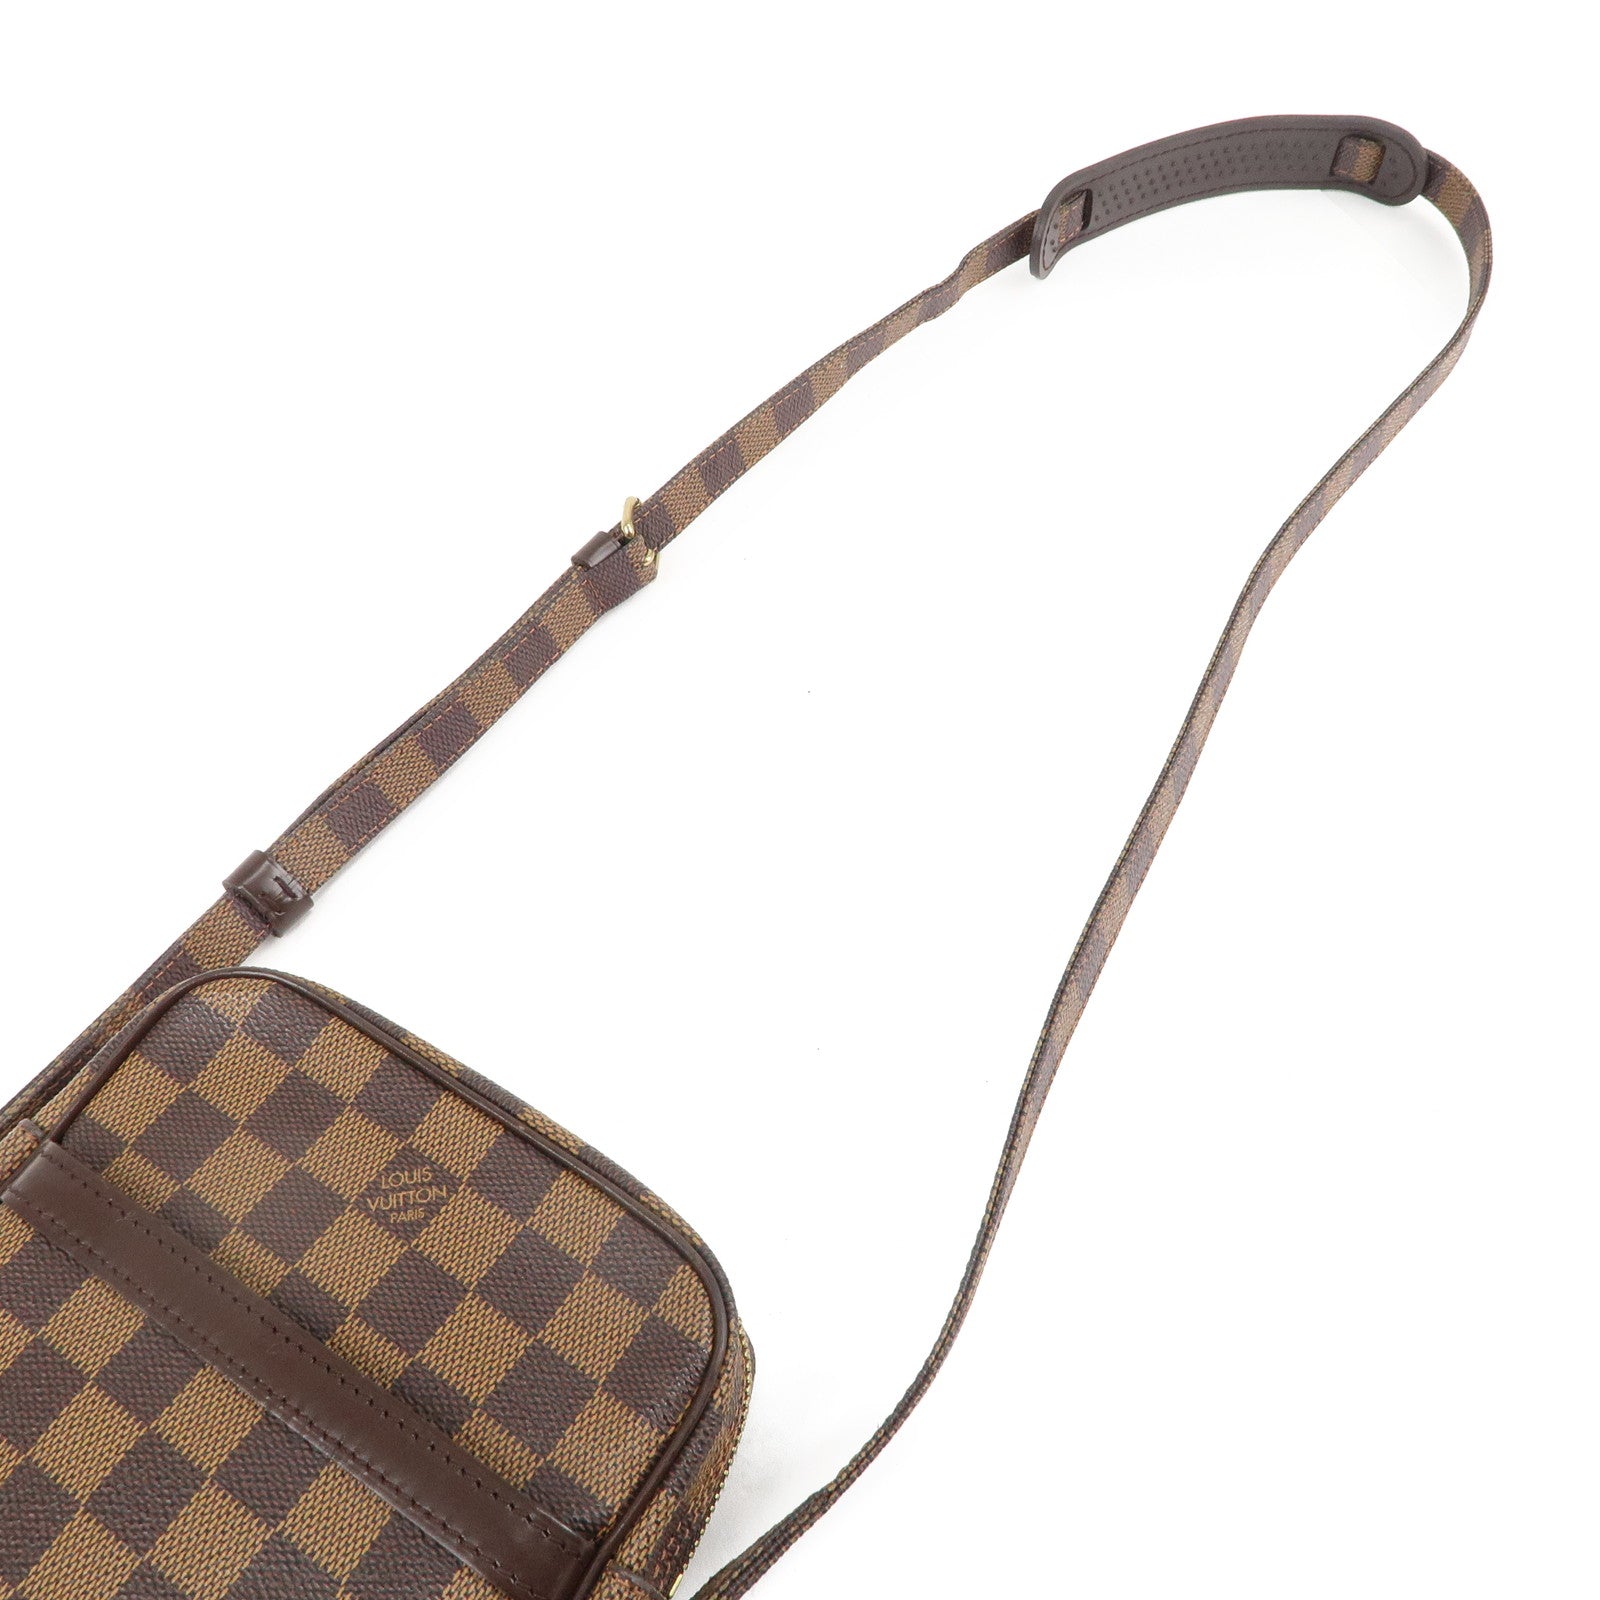 Authentic-Louis-Vuitton-Damier-Danube-Shoulder-Bag-Special-Order-N48061-Used-F/S